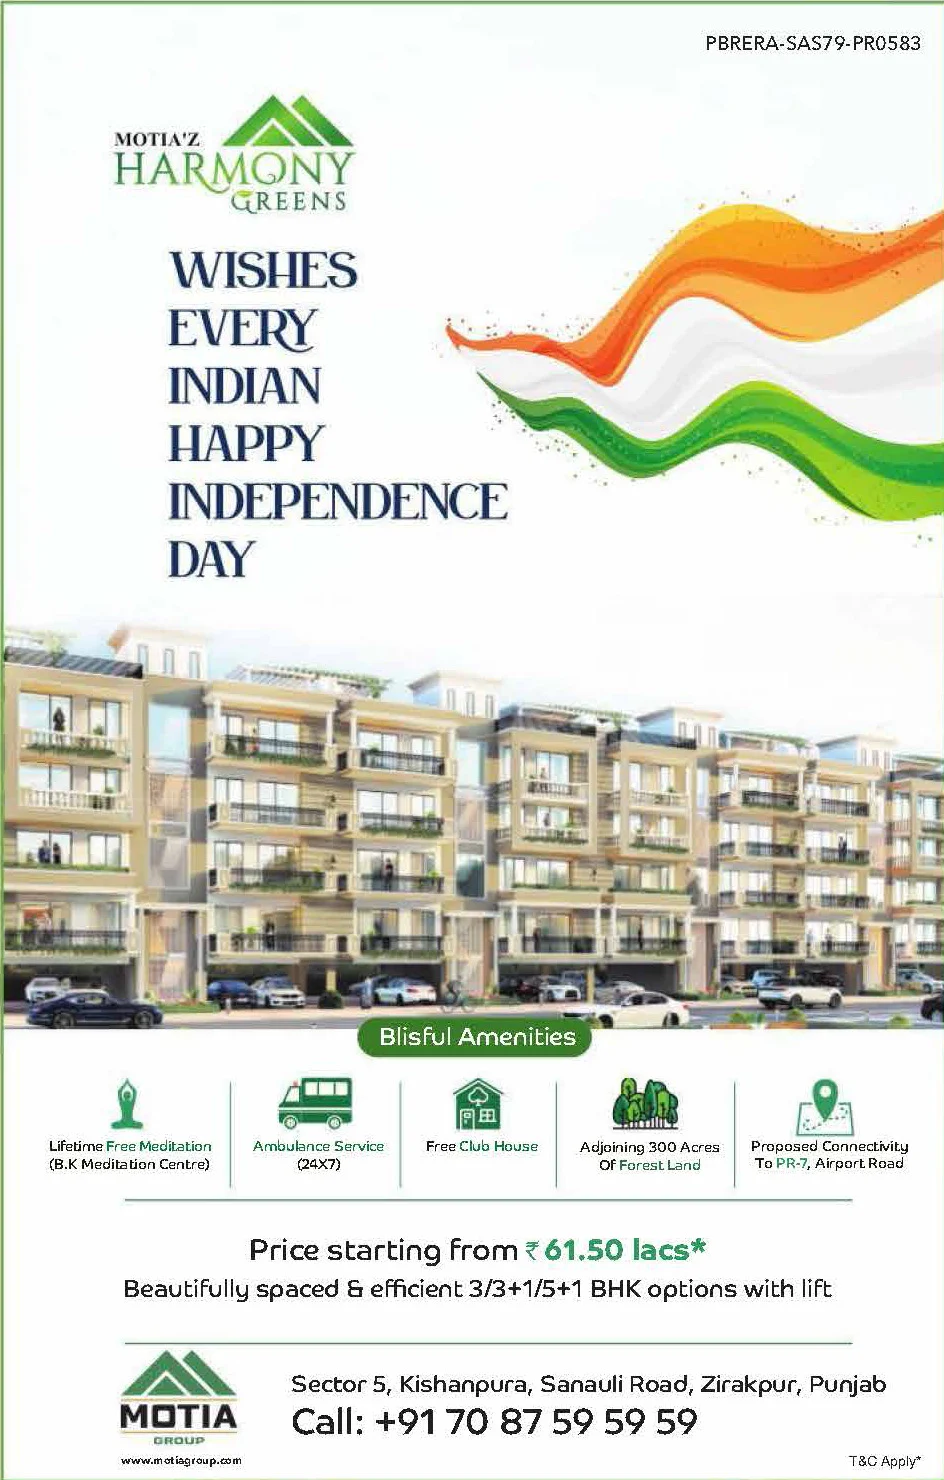 #19 Motiaz Harmony Greens Wishes every India Happy Independence Day